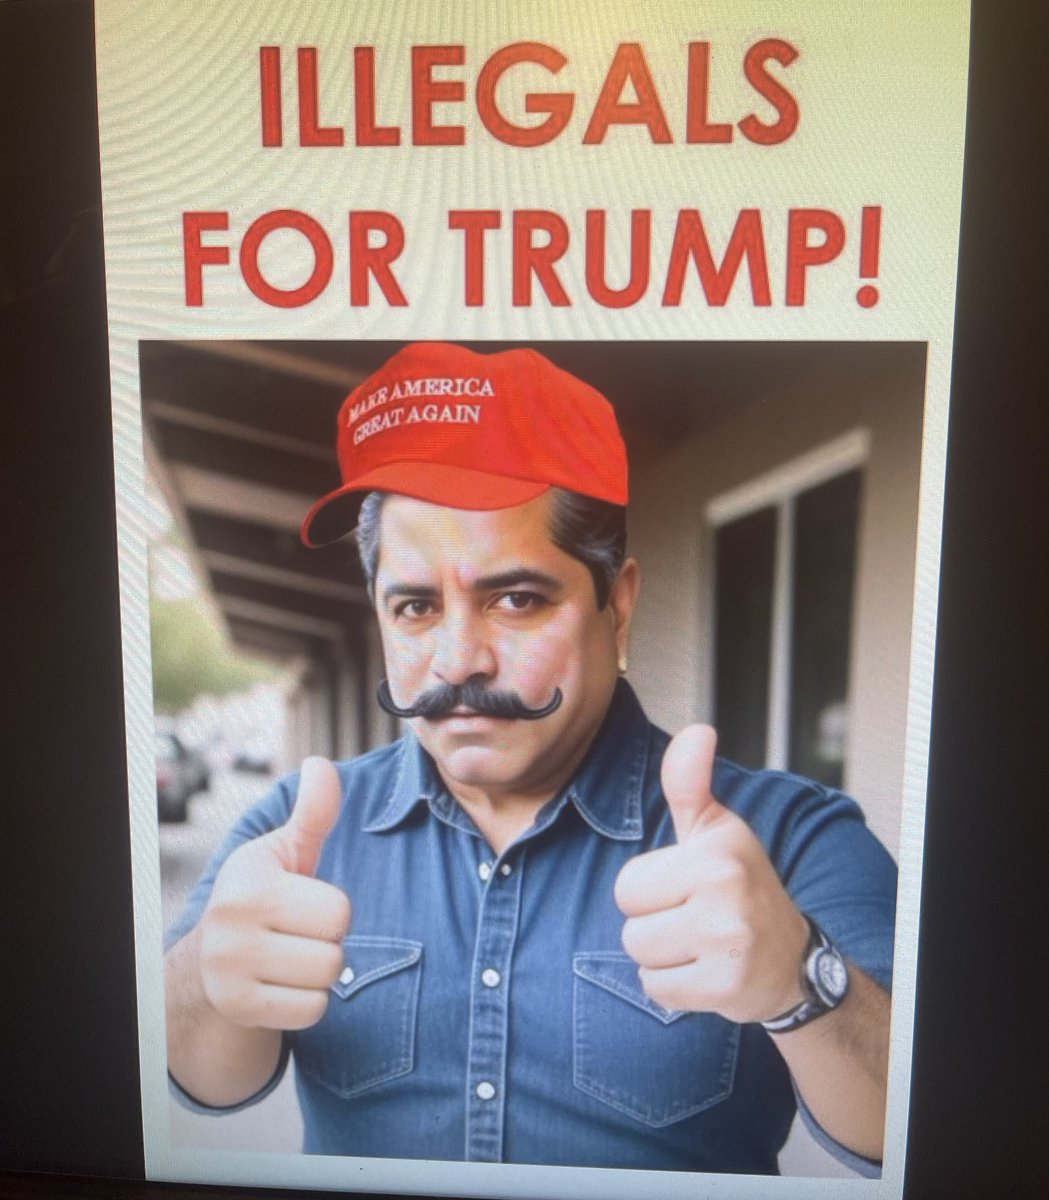 You don’t wanna miss our inaugural live recruiting session for the newest political action committee in America “Illegals for Trump” Watch the event Live right here⬇️ youtube.com/live/Pf8UZLRTQ…